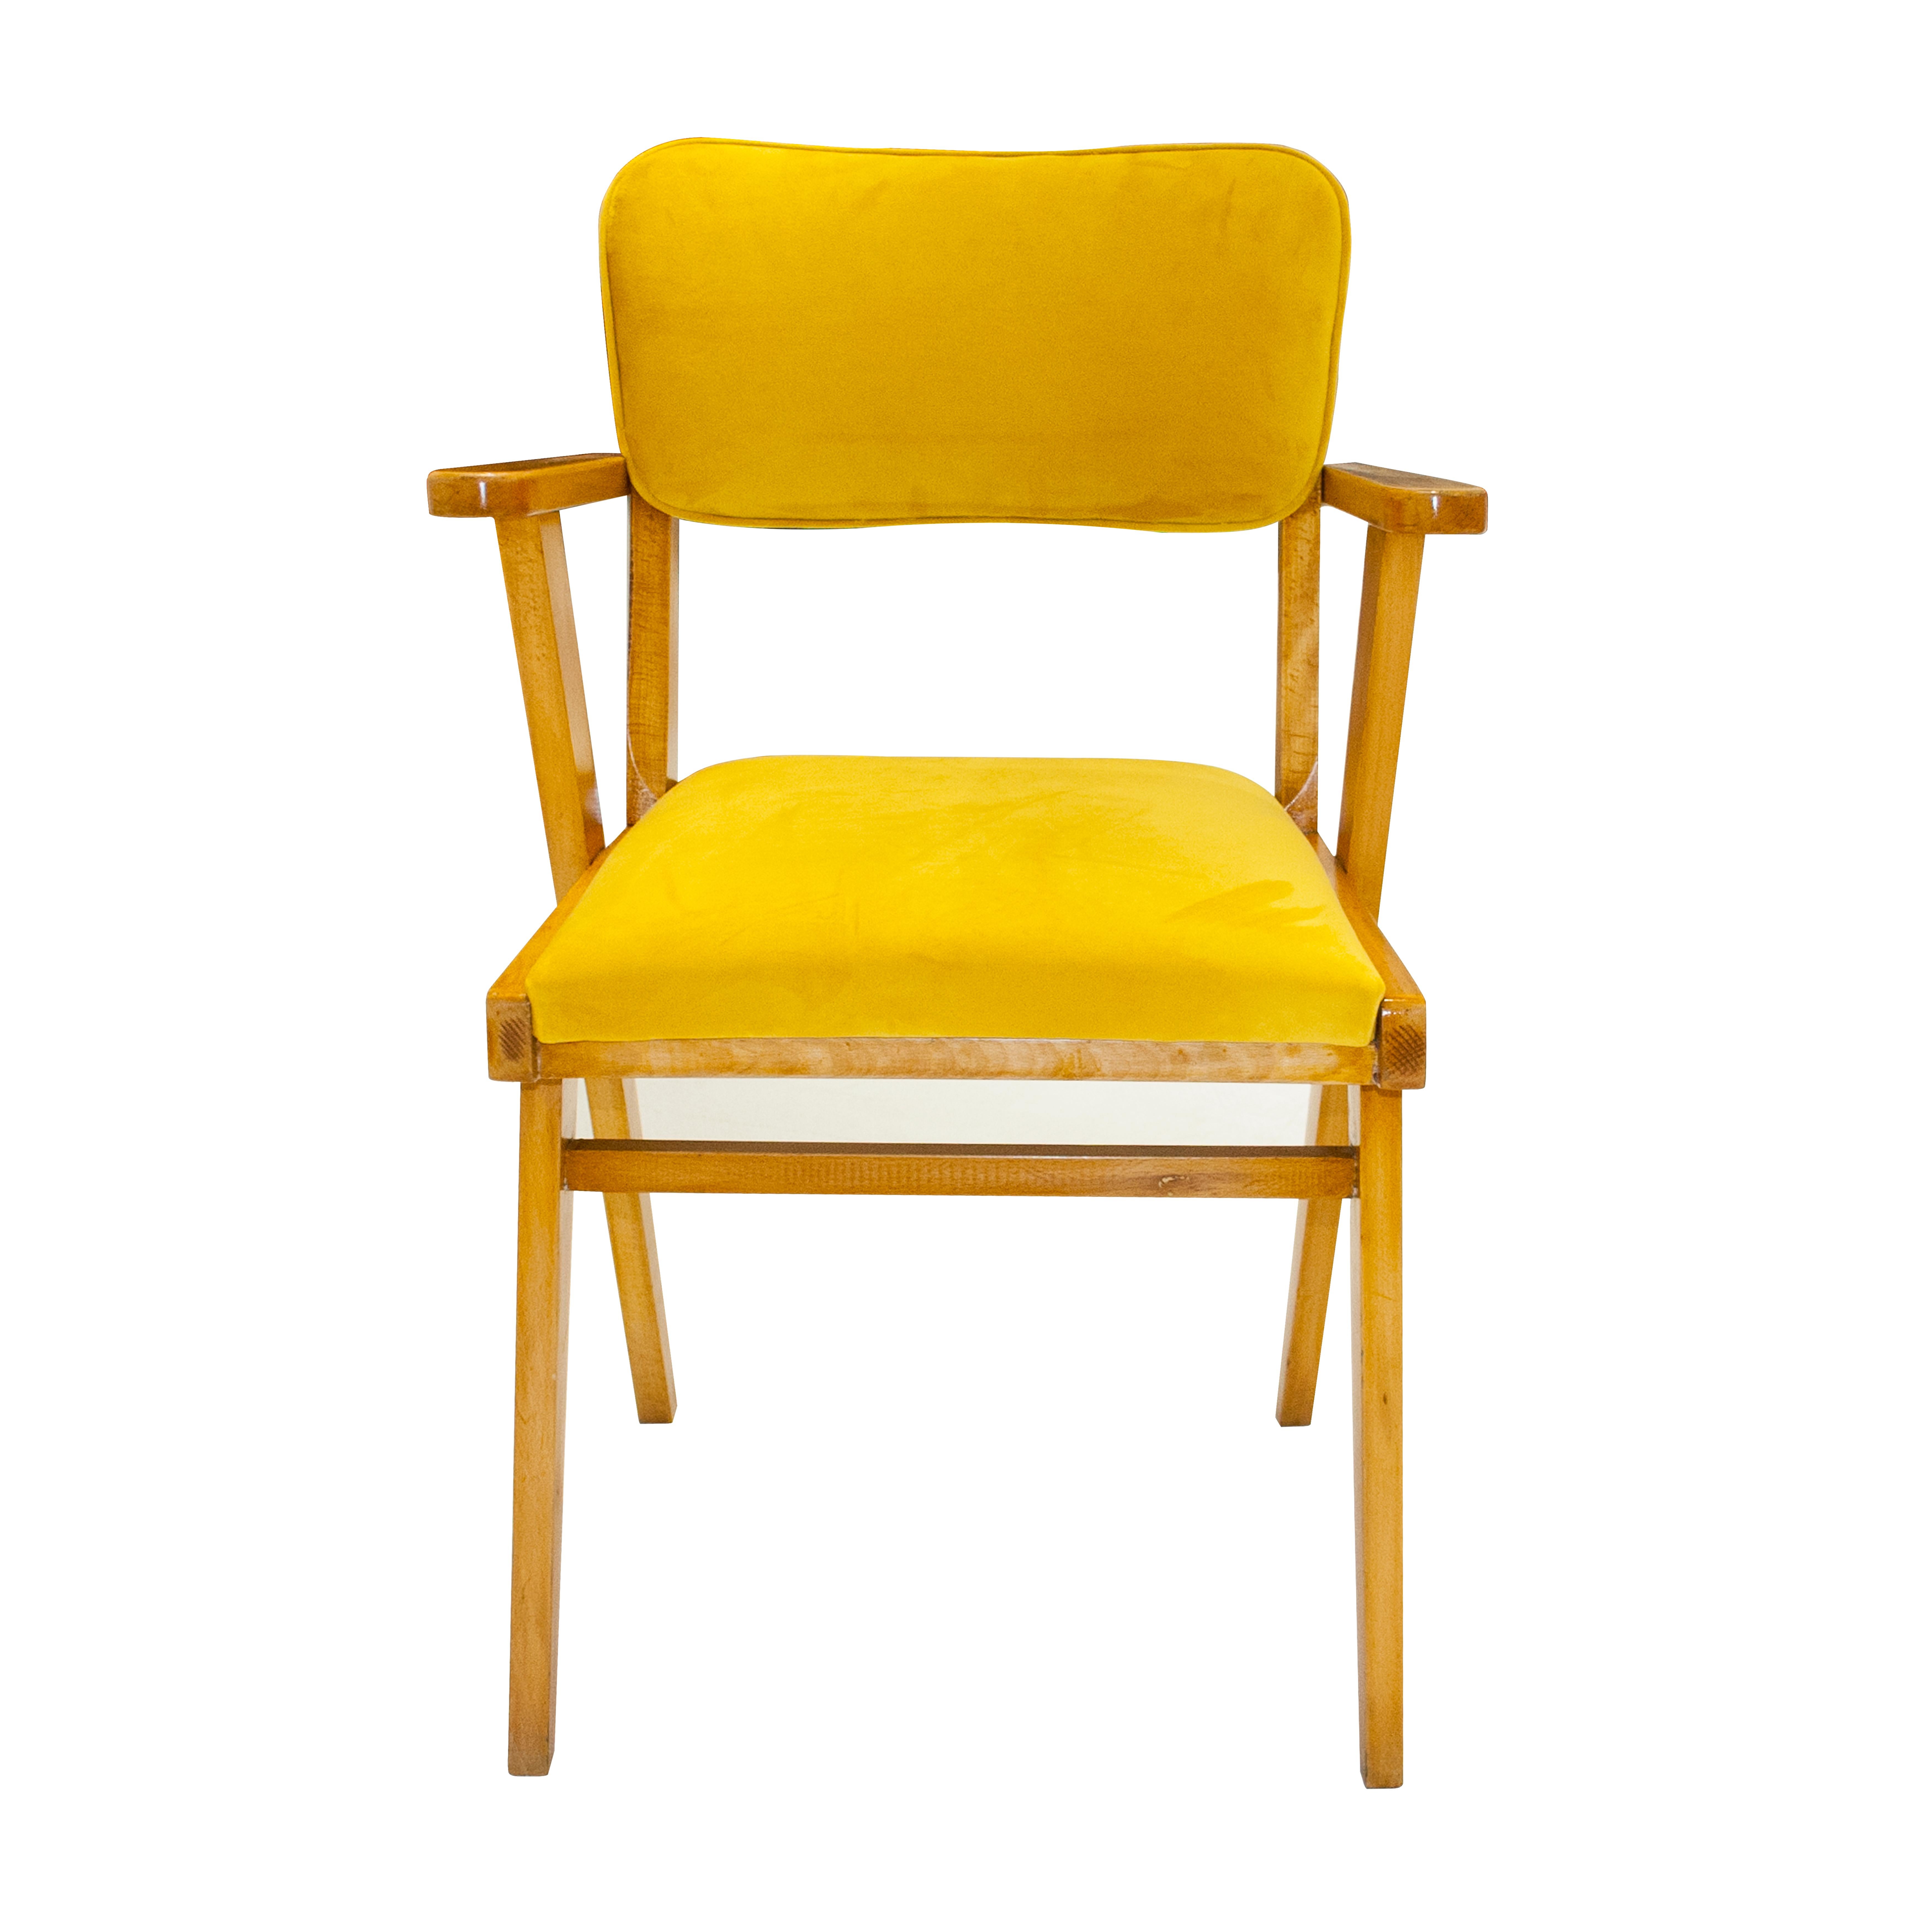 Pair of Italian armchairs with solid wood structure, seat and backrest reupholstered in yellow cotton velvet. Italy, 1960.